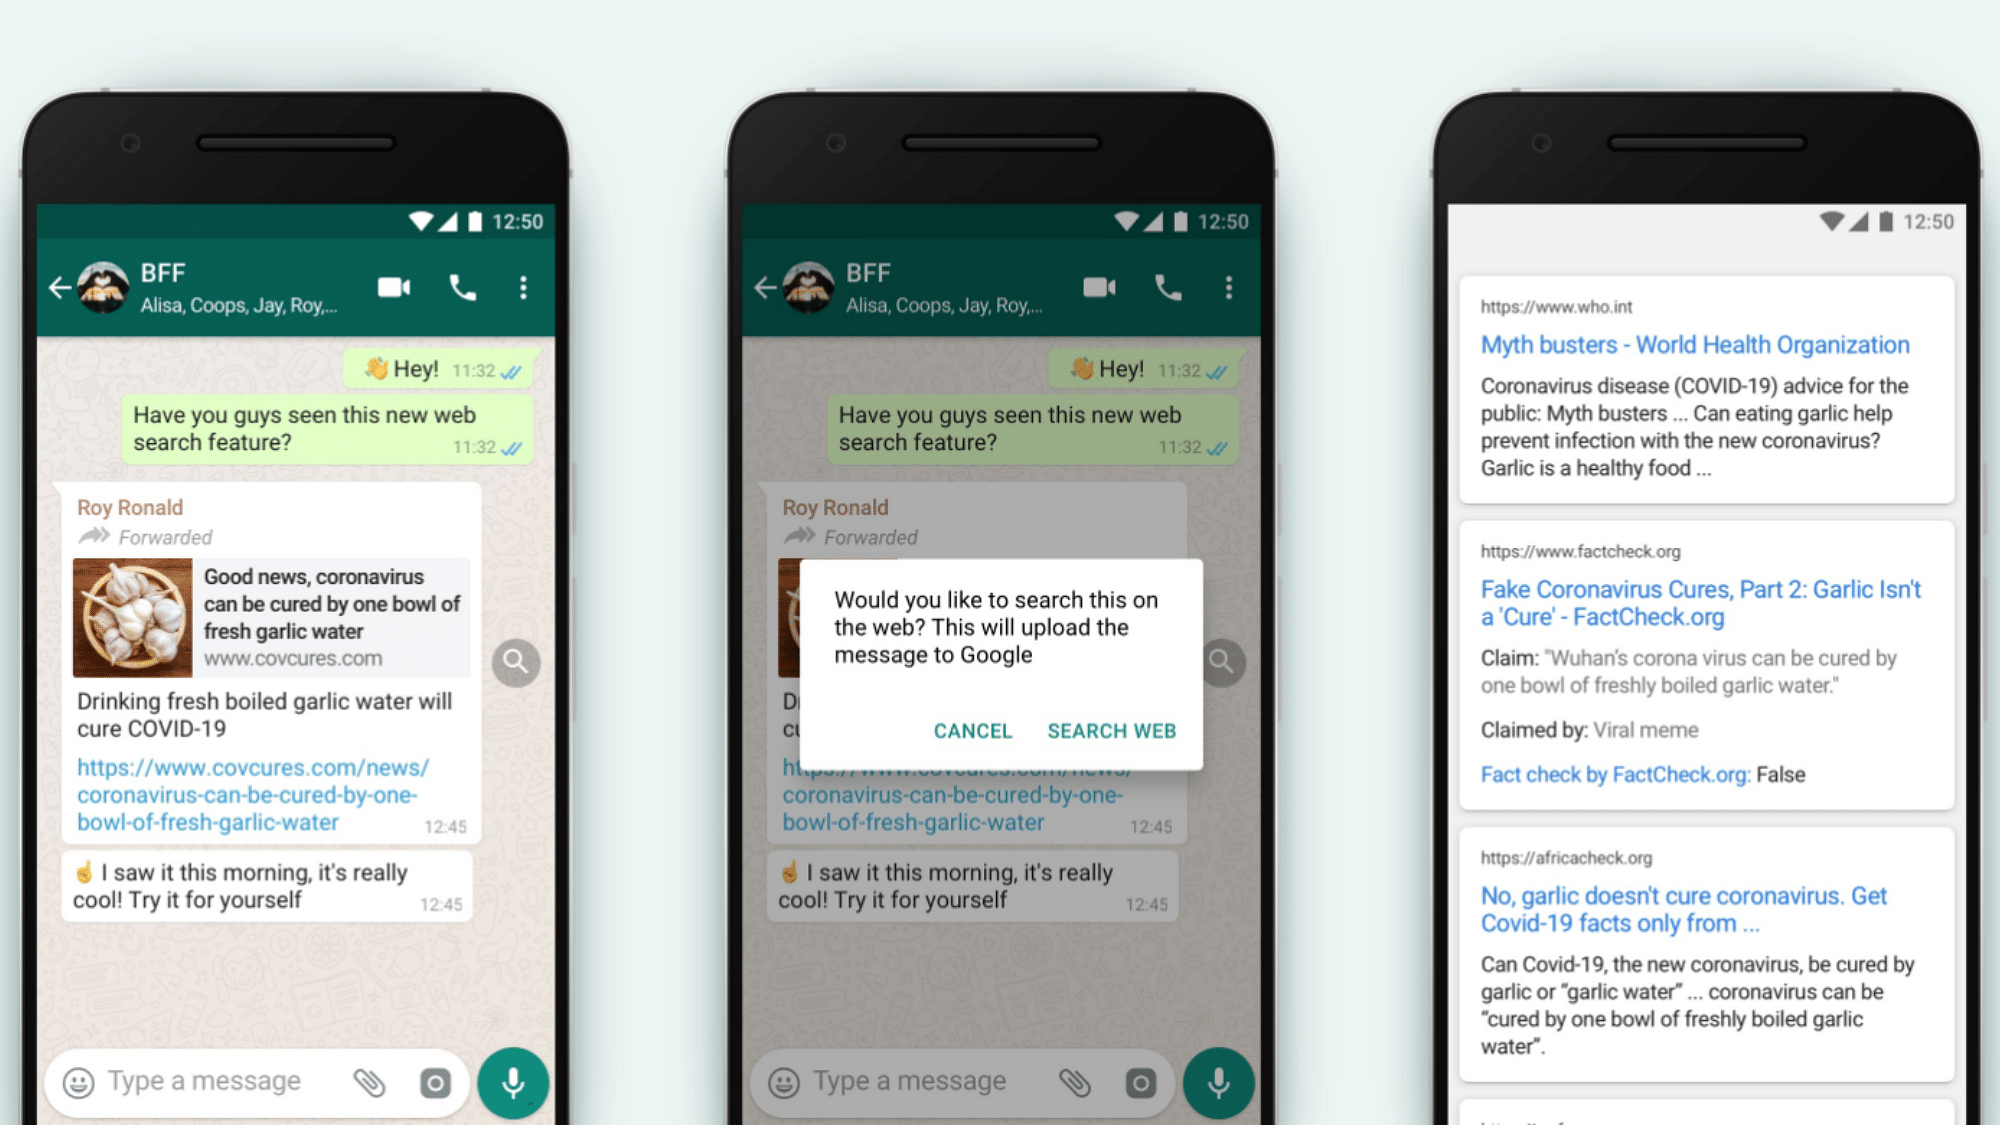 WhatsApp is piloting a way to double check forwarded messages by tapping a magnifying glass icon in the chat.